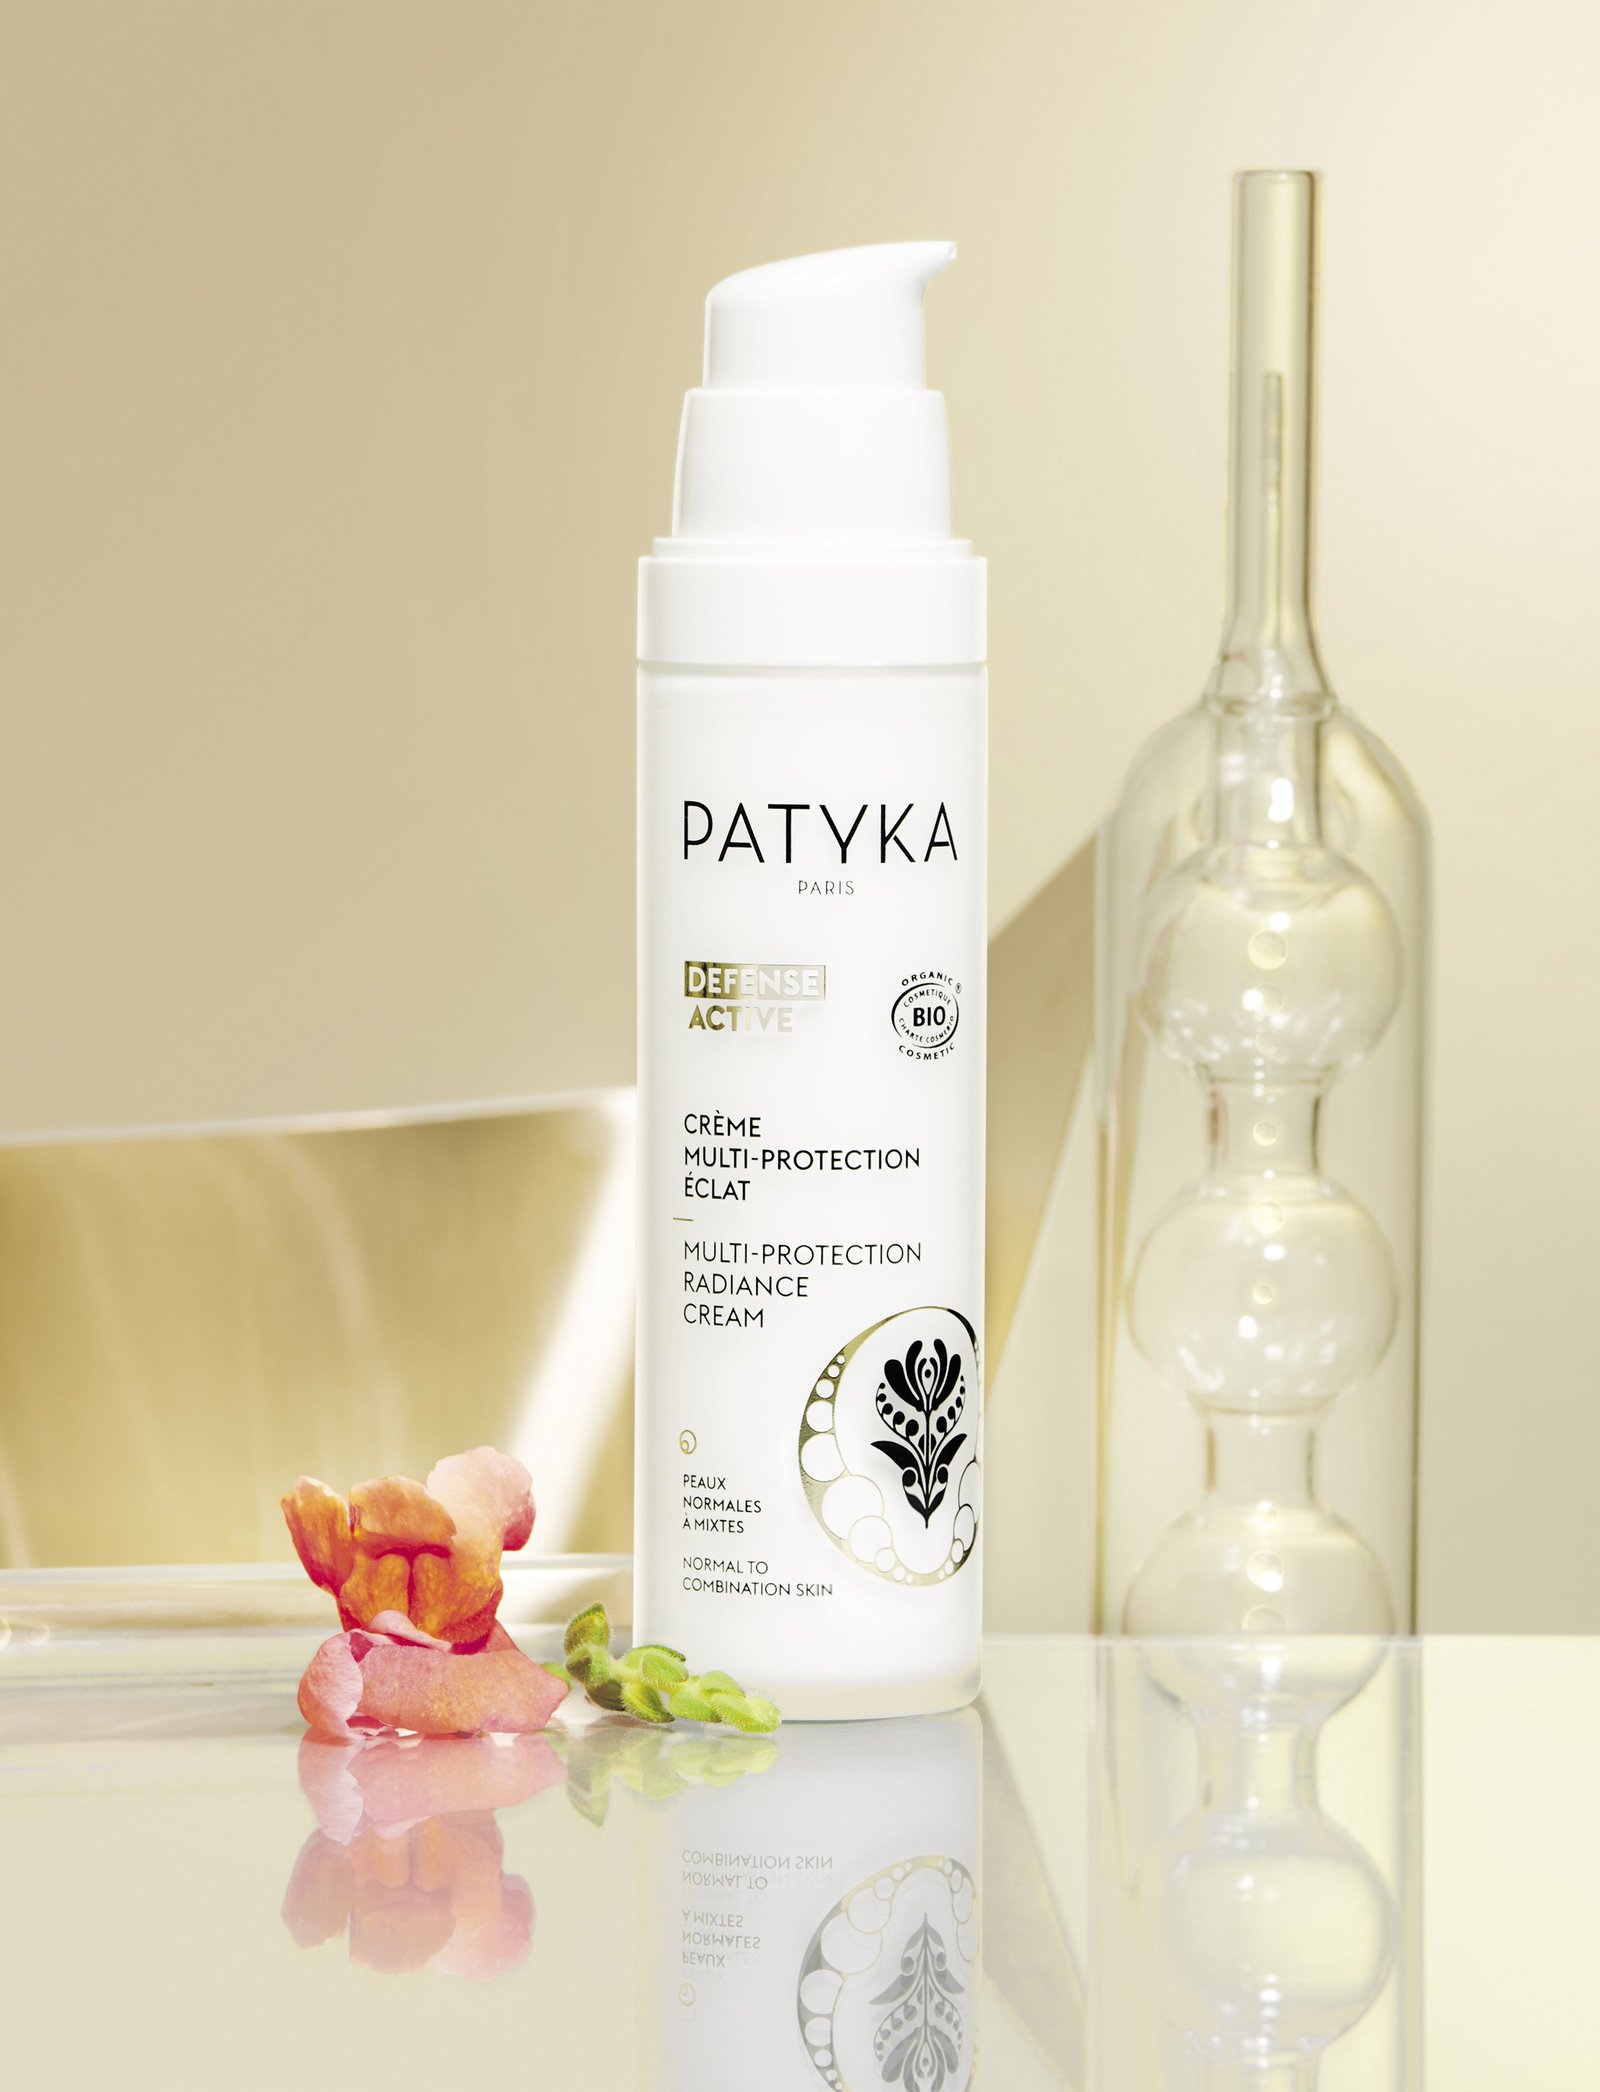 Patyka Multi-Protection Radiance Cream / Normal To Combination Skin 50ml